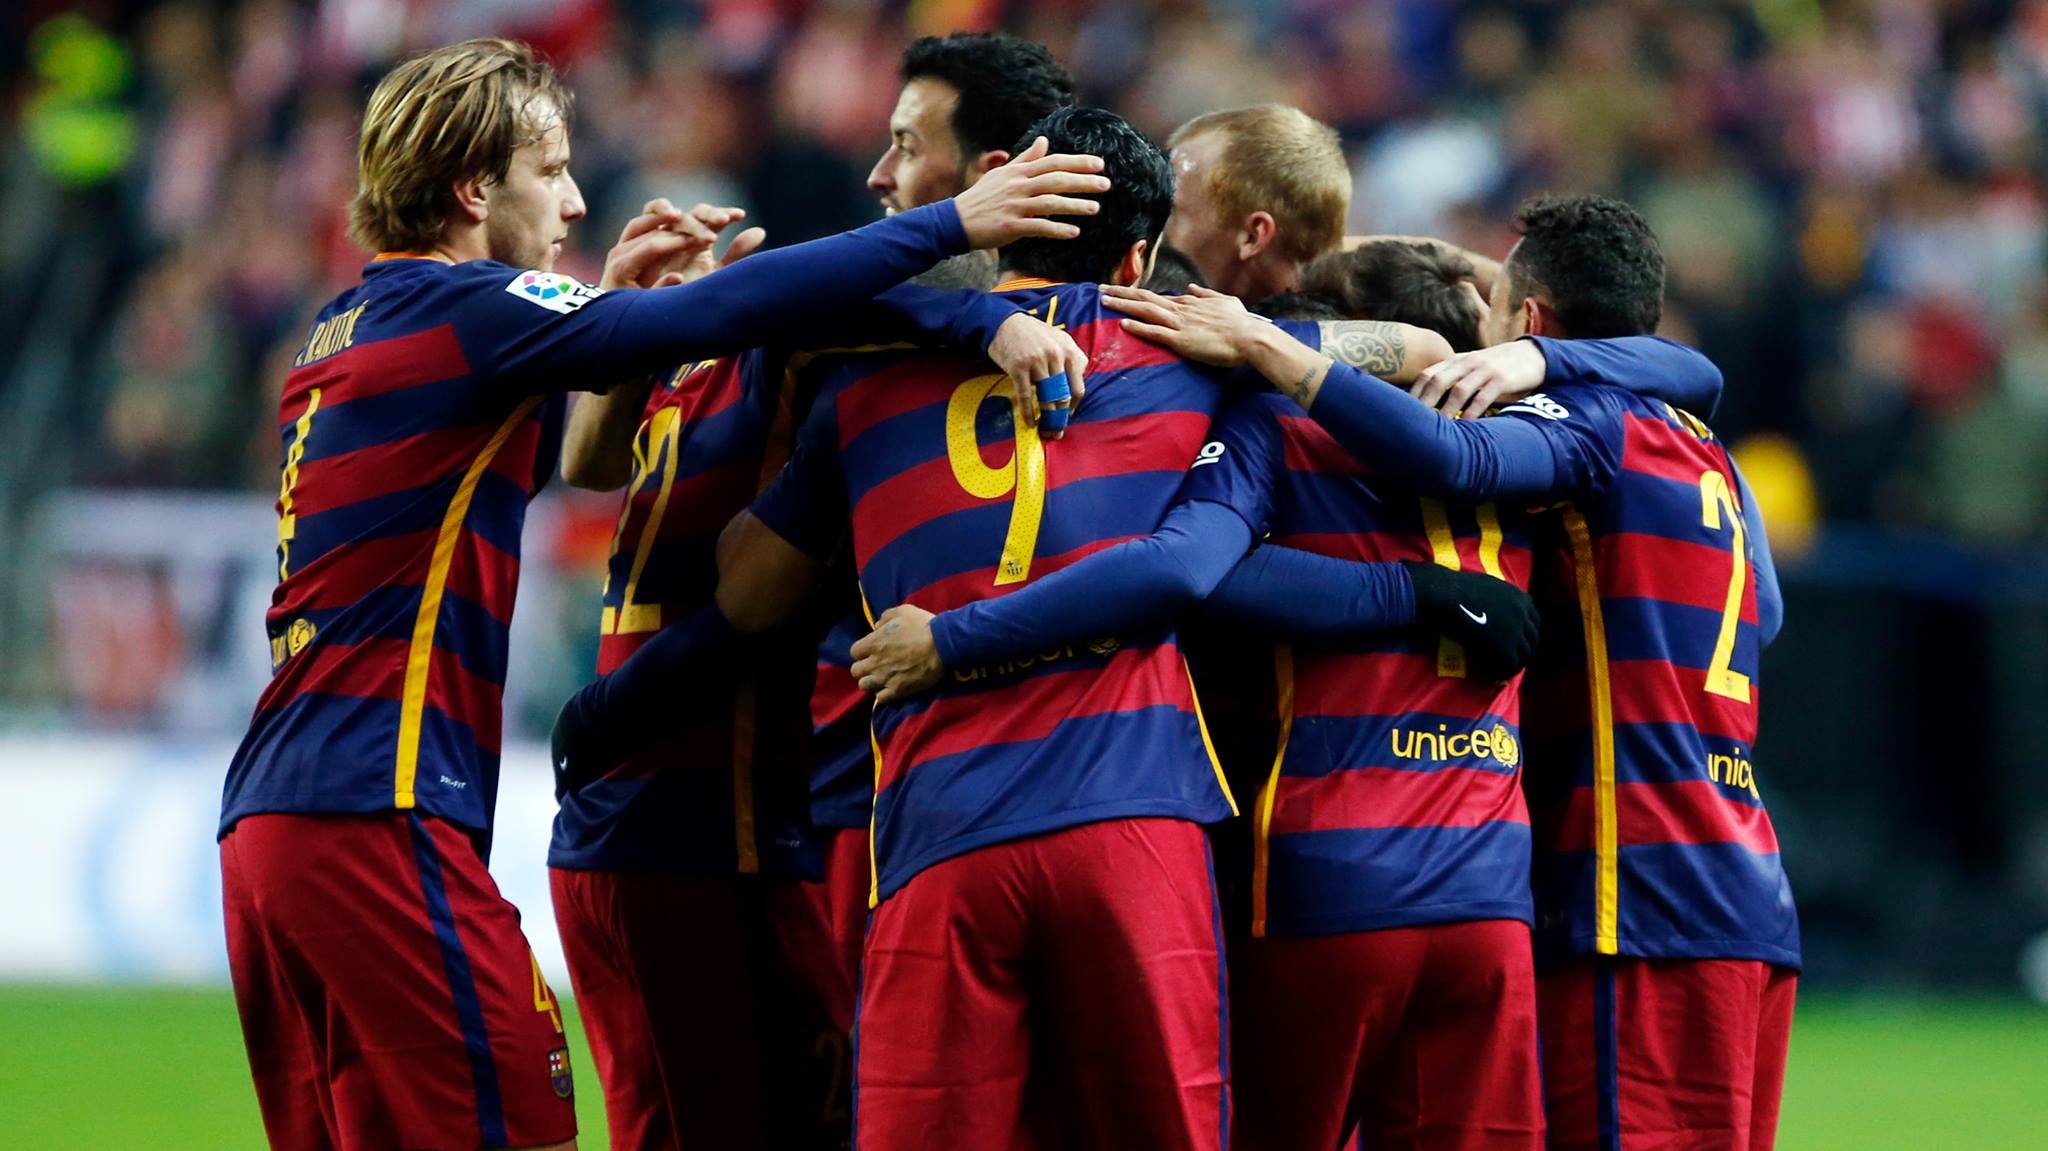 Will Barcelona return to winning ways at La Liga next time out?